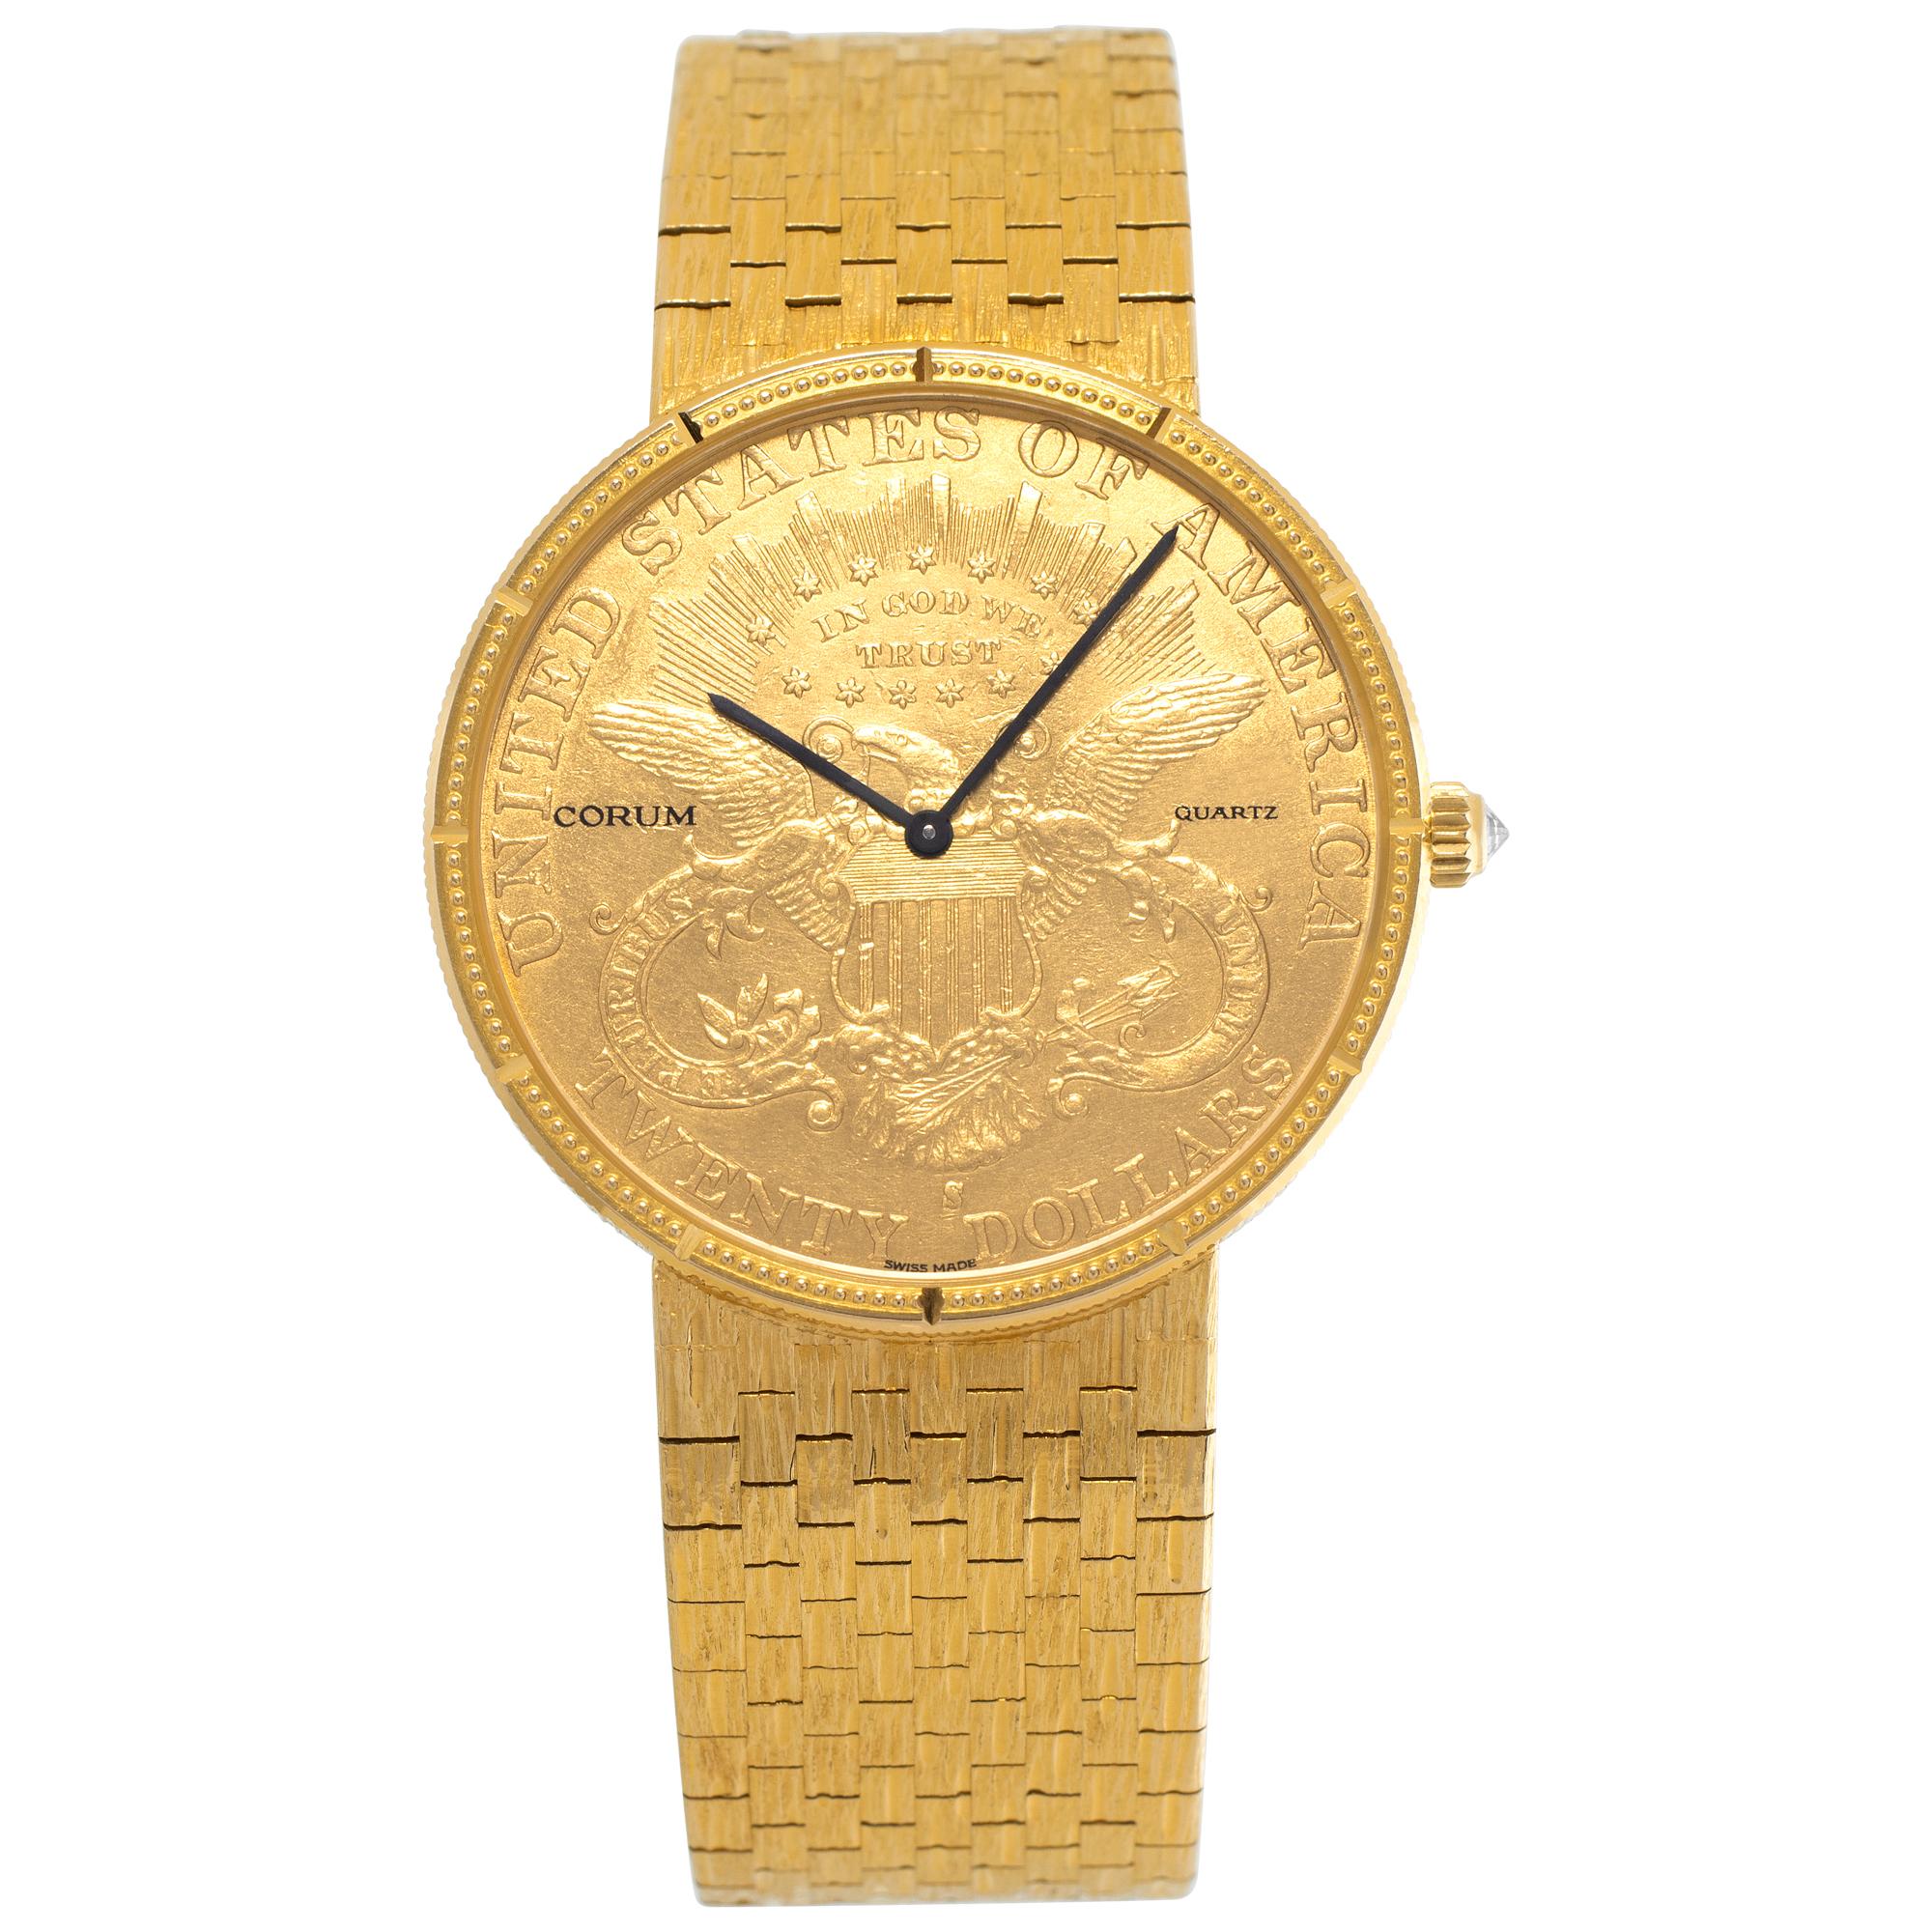 Corum $20 gold piece 5014556 in yellow gold with a Gold dial 35mm Quartz watch